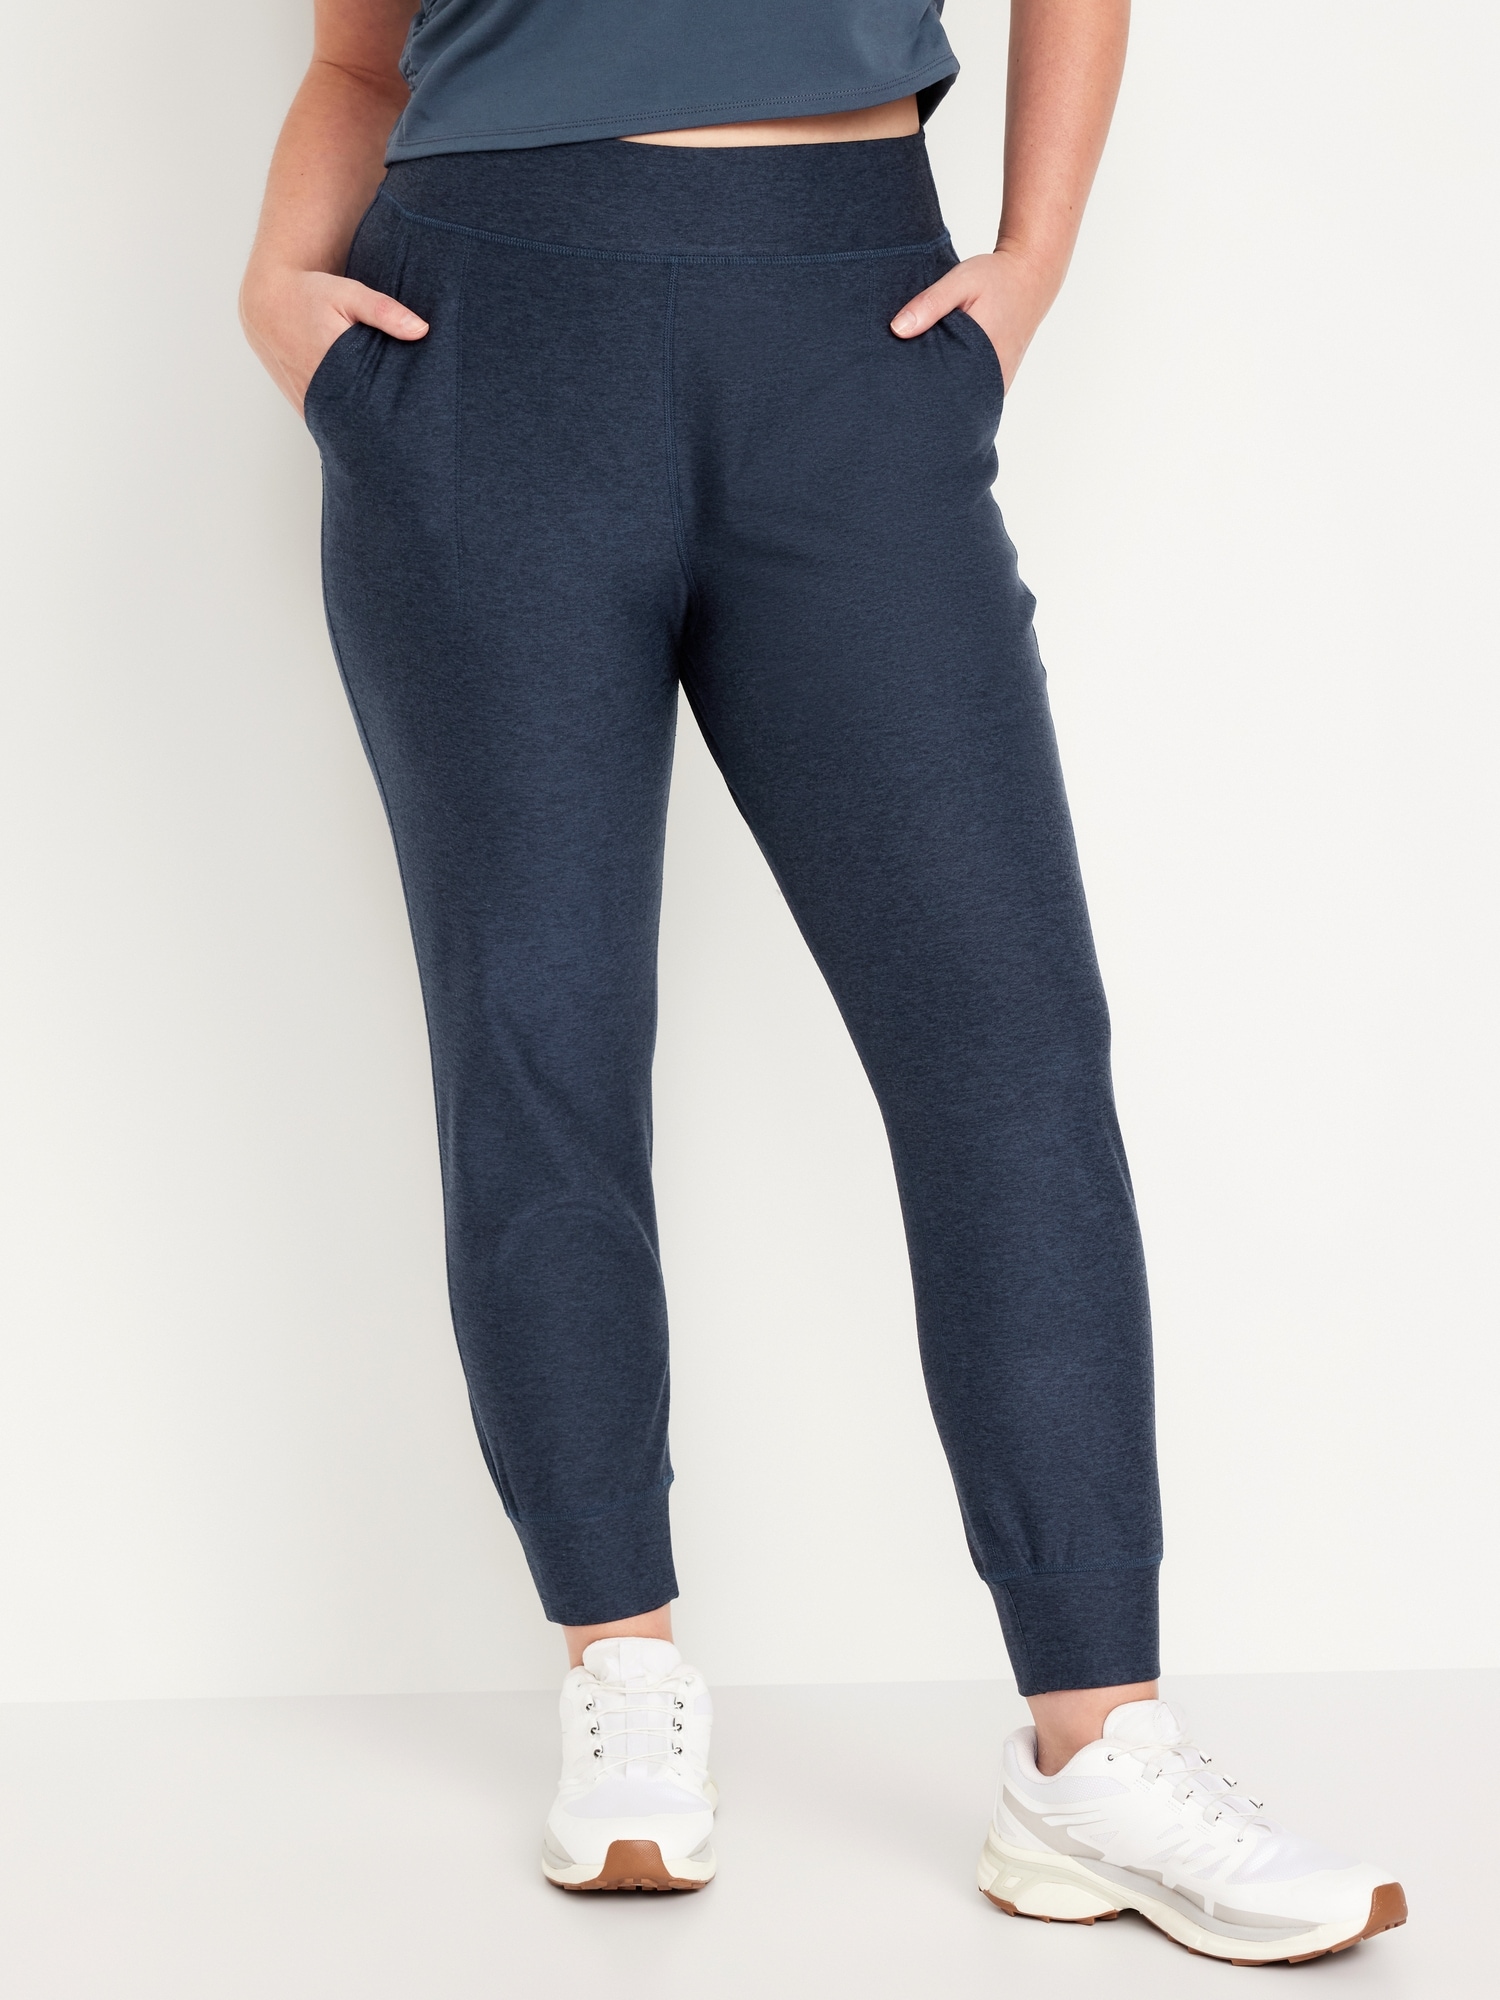 Leggings Depot Womens Relaxed fit Jogger Pants - Track Cuff Sweatpants with  Pockets, Jade, Large in Bahrain